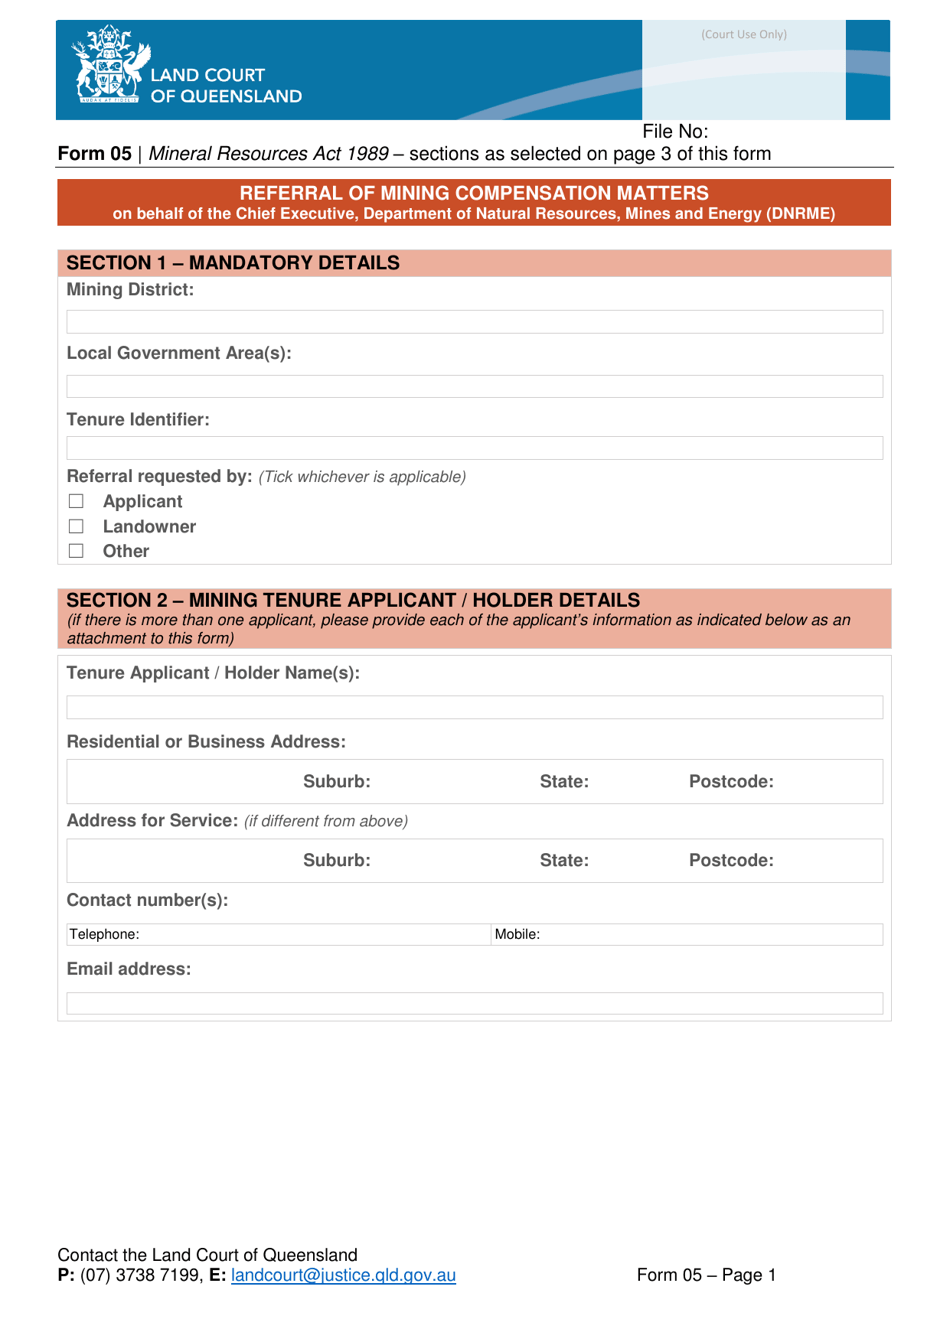 Form 05 Referral of Mining Compensation Matters - Queensland, Australia, Page 1